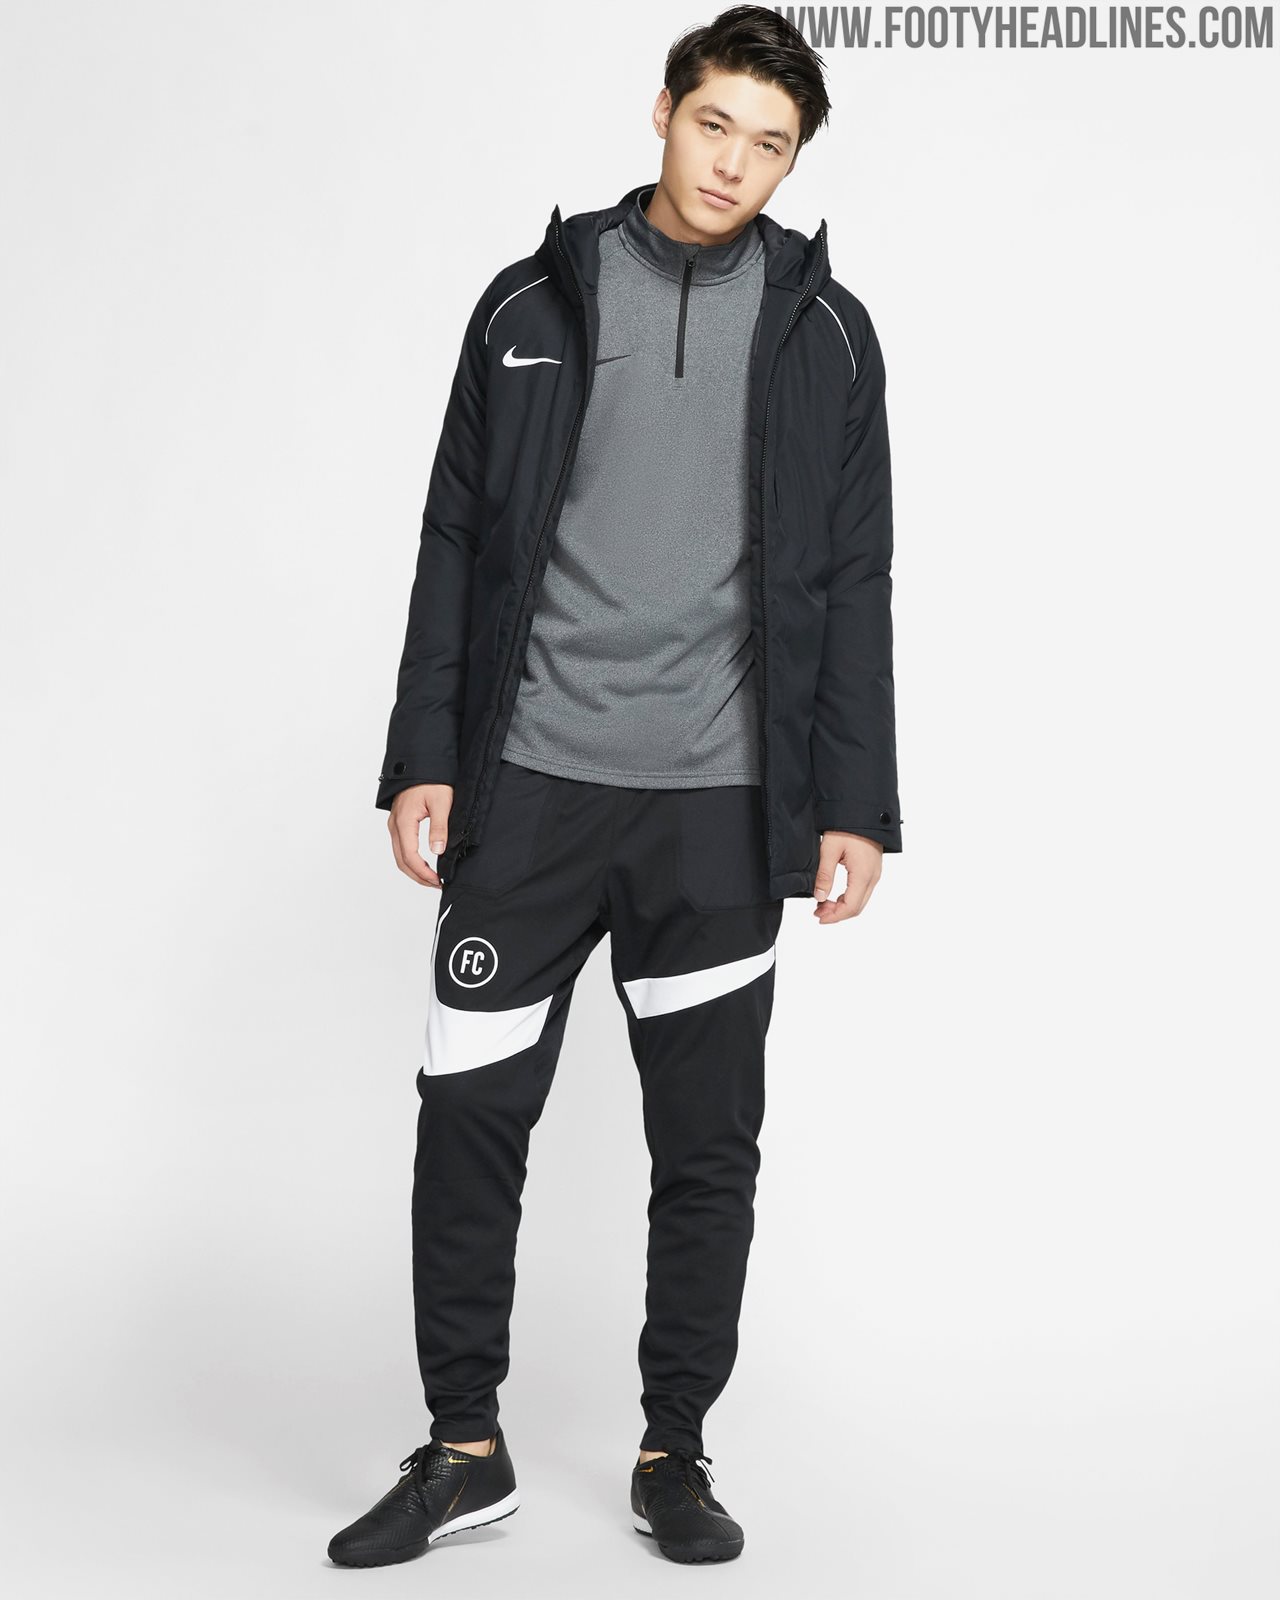 Stunning Nike Total 90 Inspired Nike FC Collection Released - Footy ...